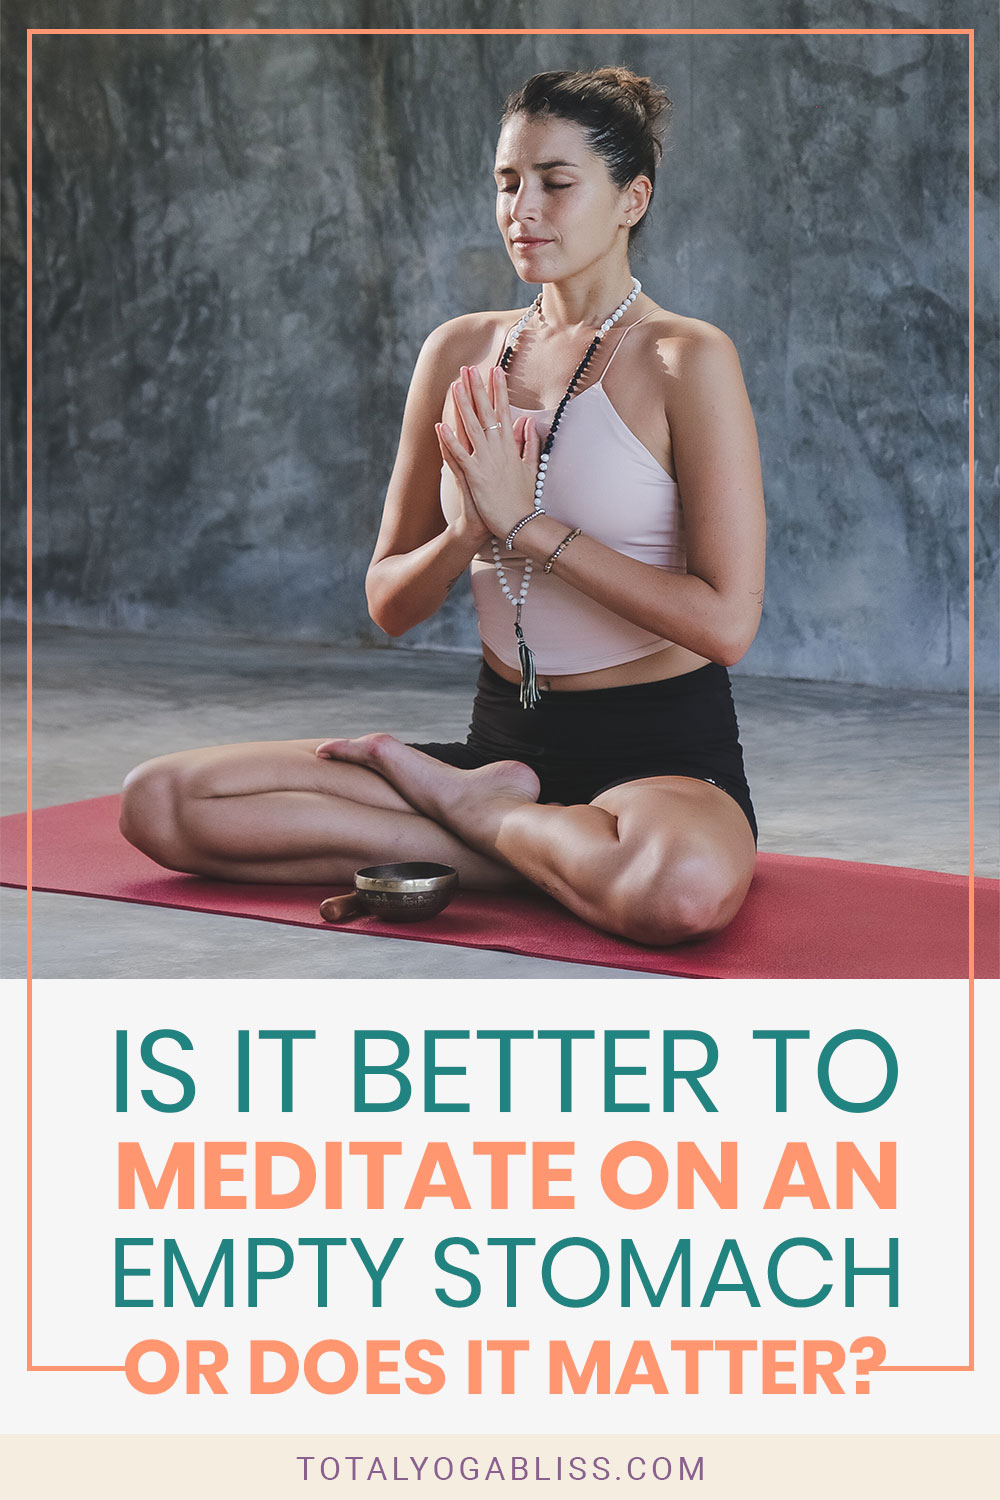 Woman meditating on a red yoga mat - Is it Better to Meditate on an Empty Stomach or Does it Matter?